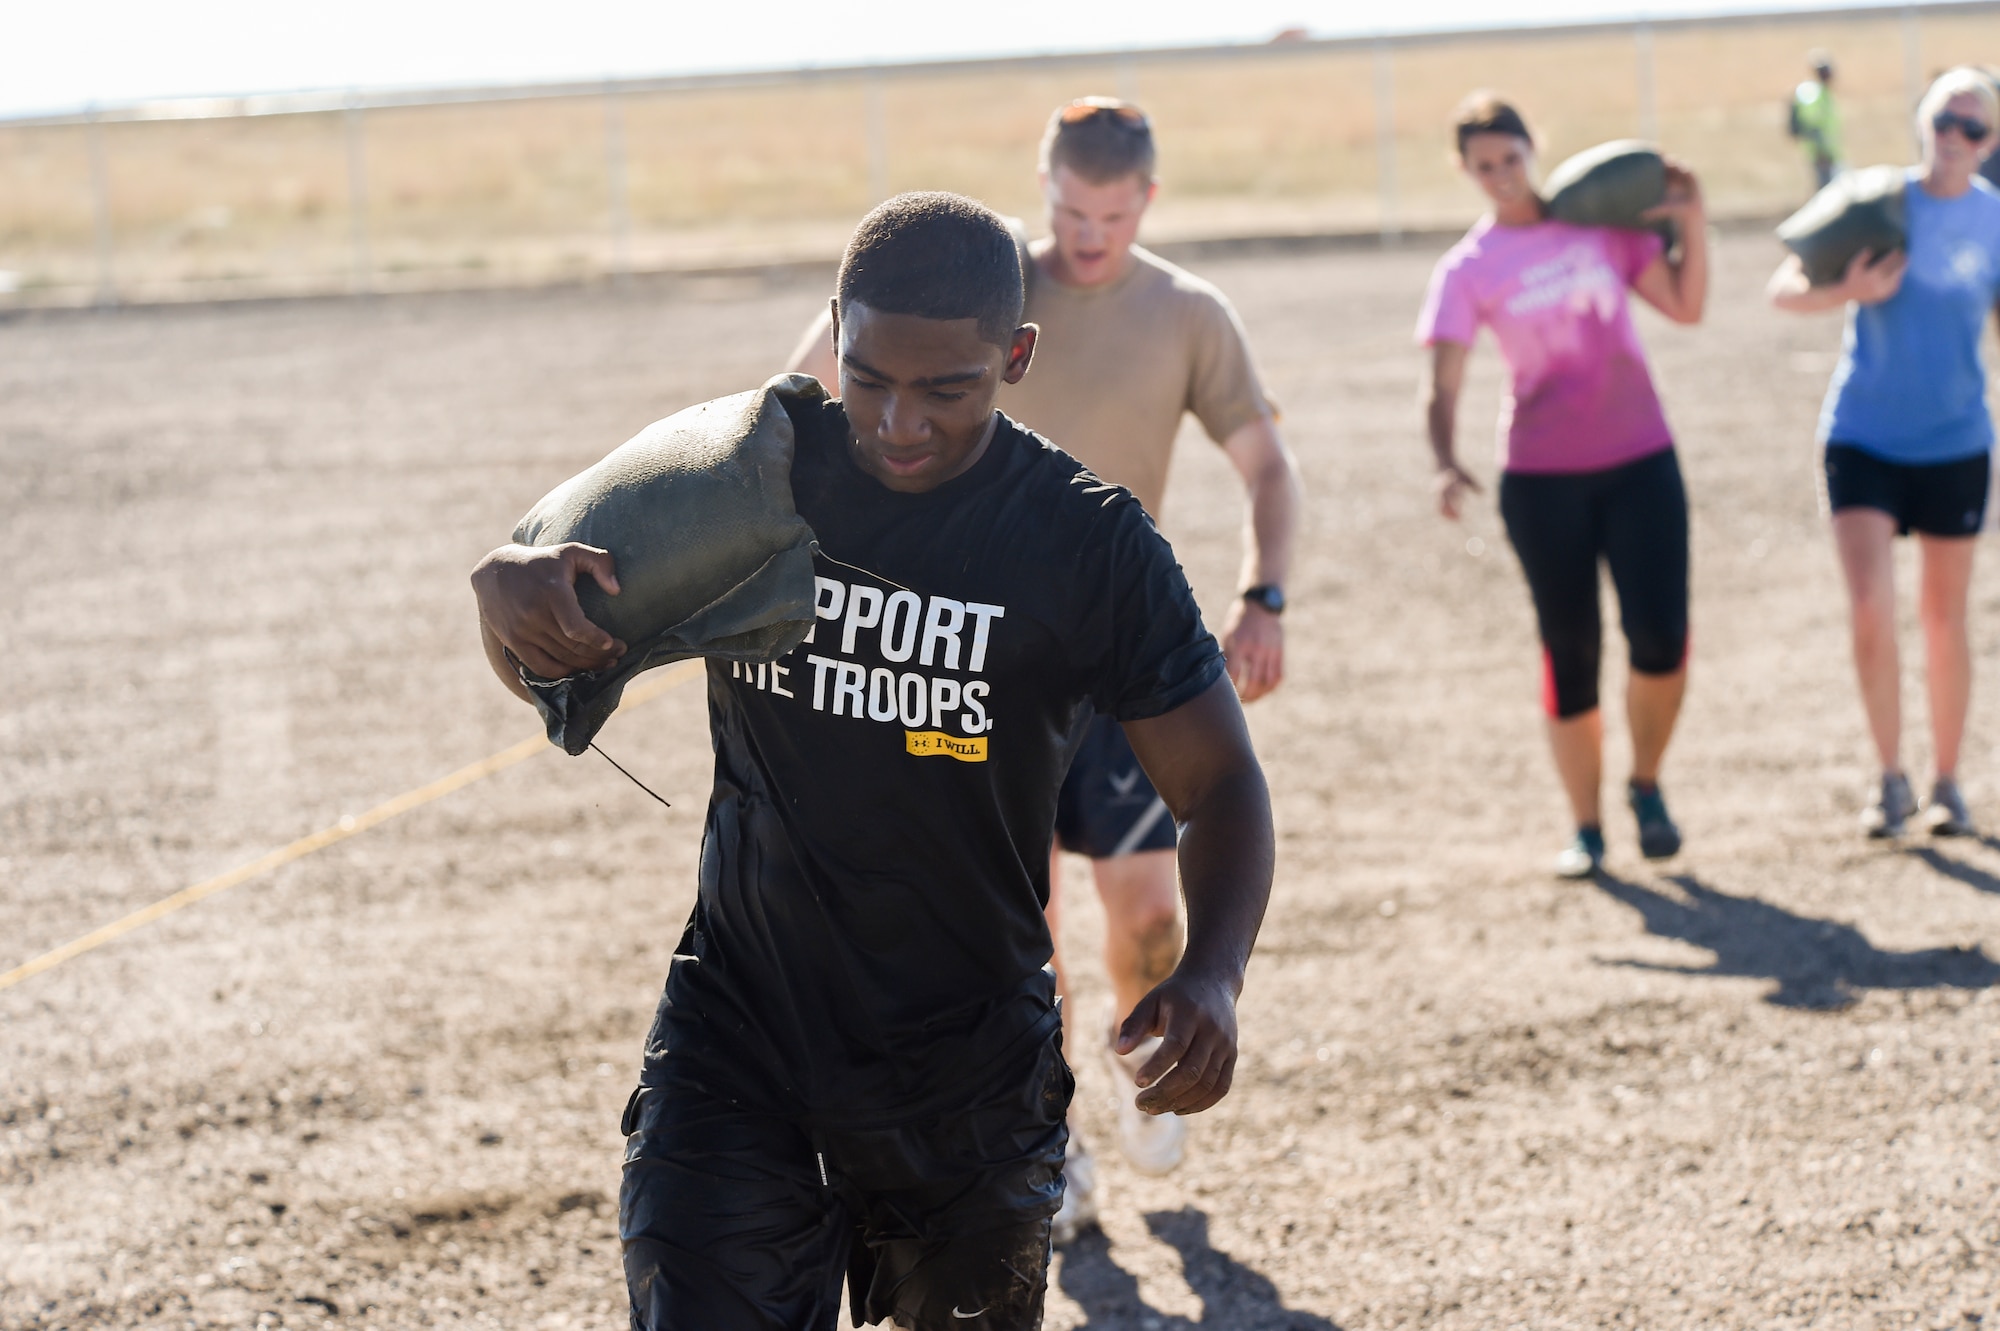 Team Buckley members carry sand bags as part of WARFIT Sept. 25, 2014, on Buckley Air Force Base, Colo. The 460th Civil Engineer Squadron hosted the September WARFIT, which consisted of a 5K run and a mud obstacle course. WARFIT is a way for the 460th Space Wing and base partner units to get together and stay physically fit. (U.S. Air Force photo by Senior Airman Phillip Houk/Released)